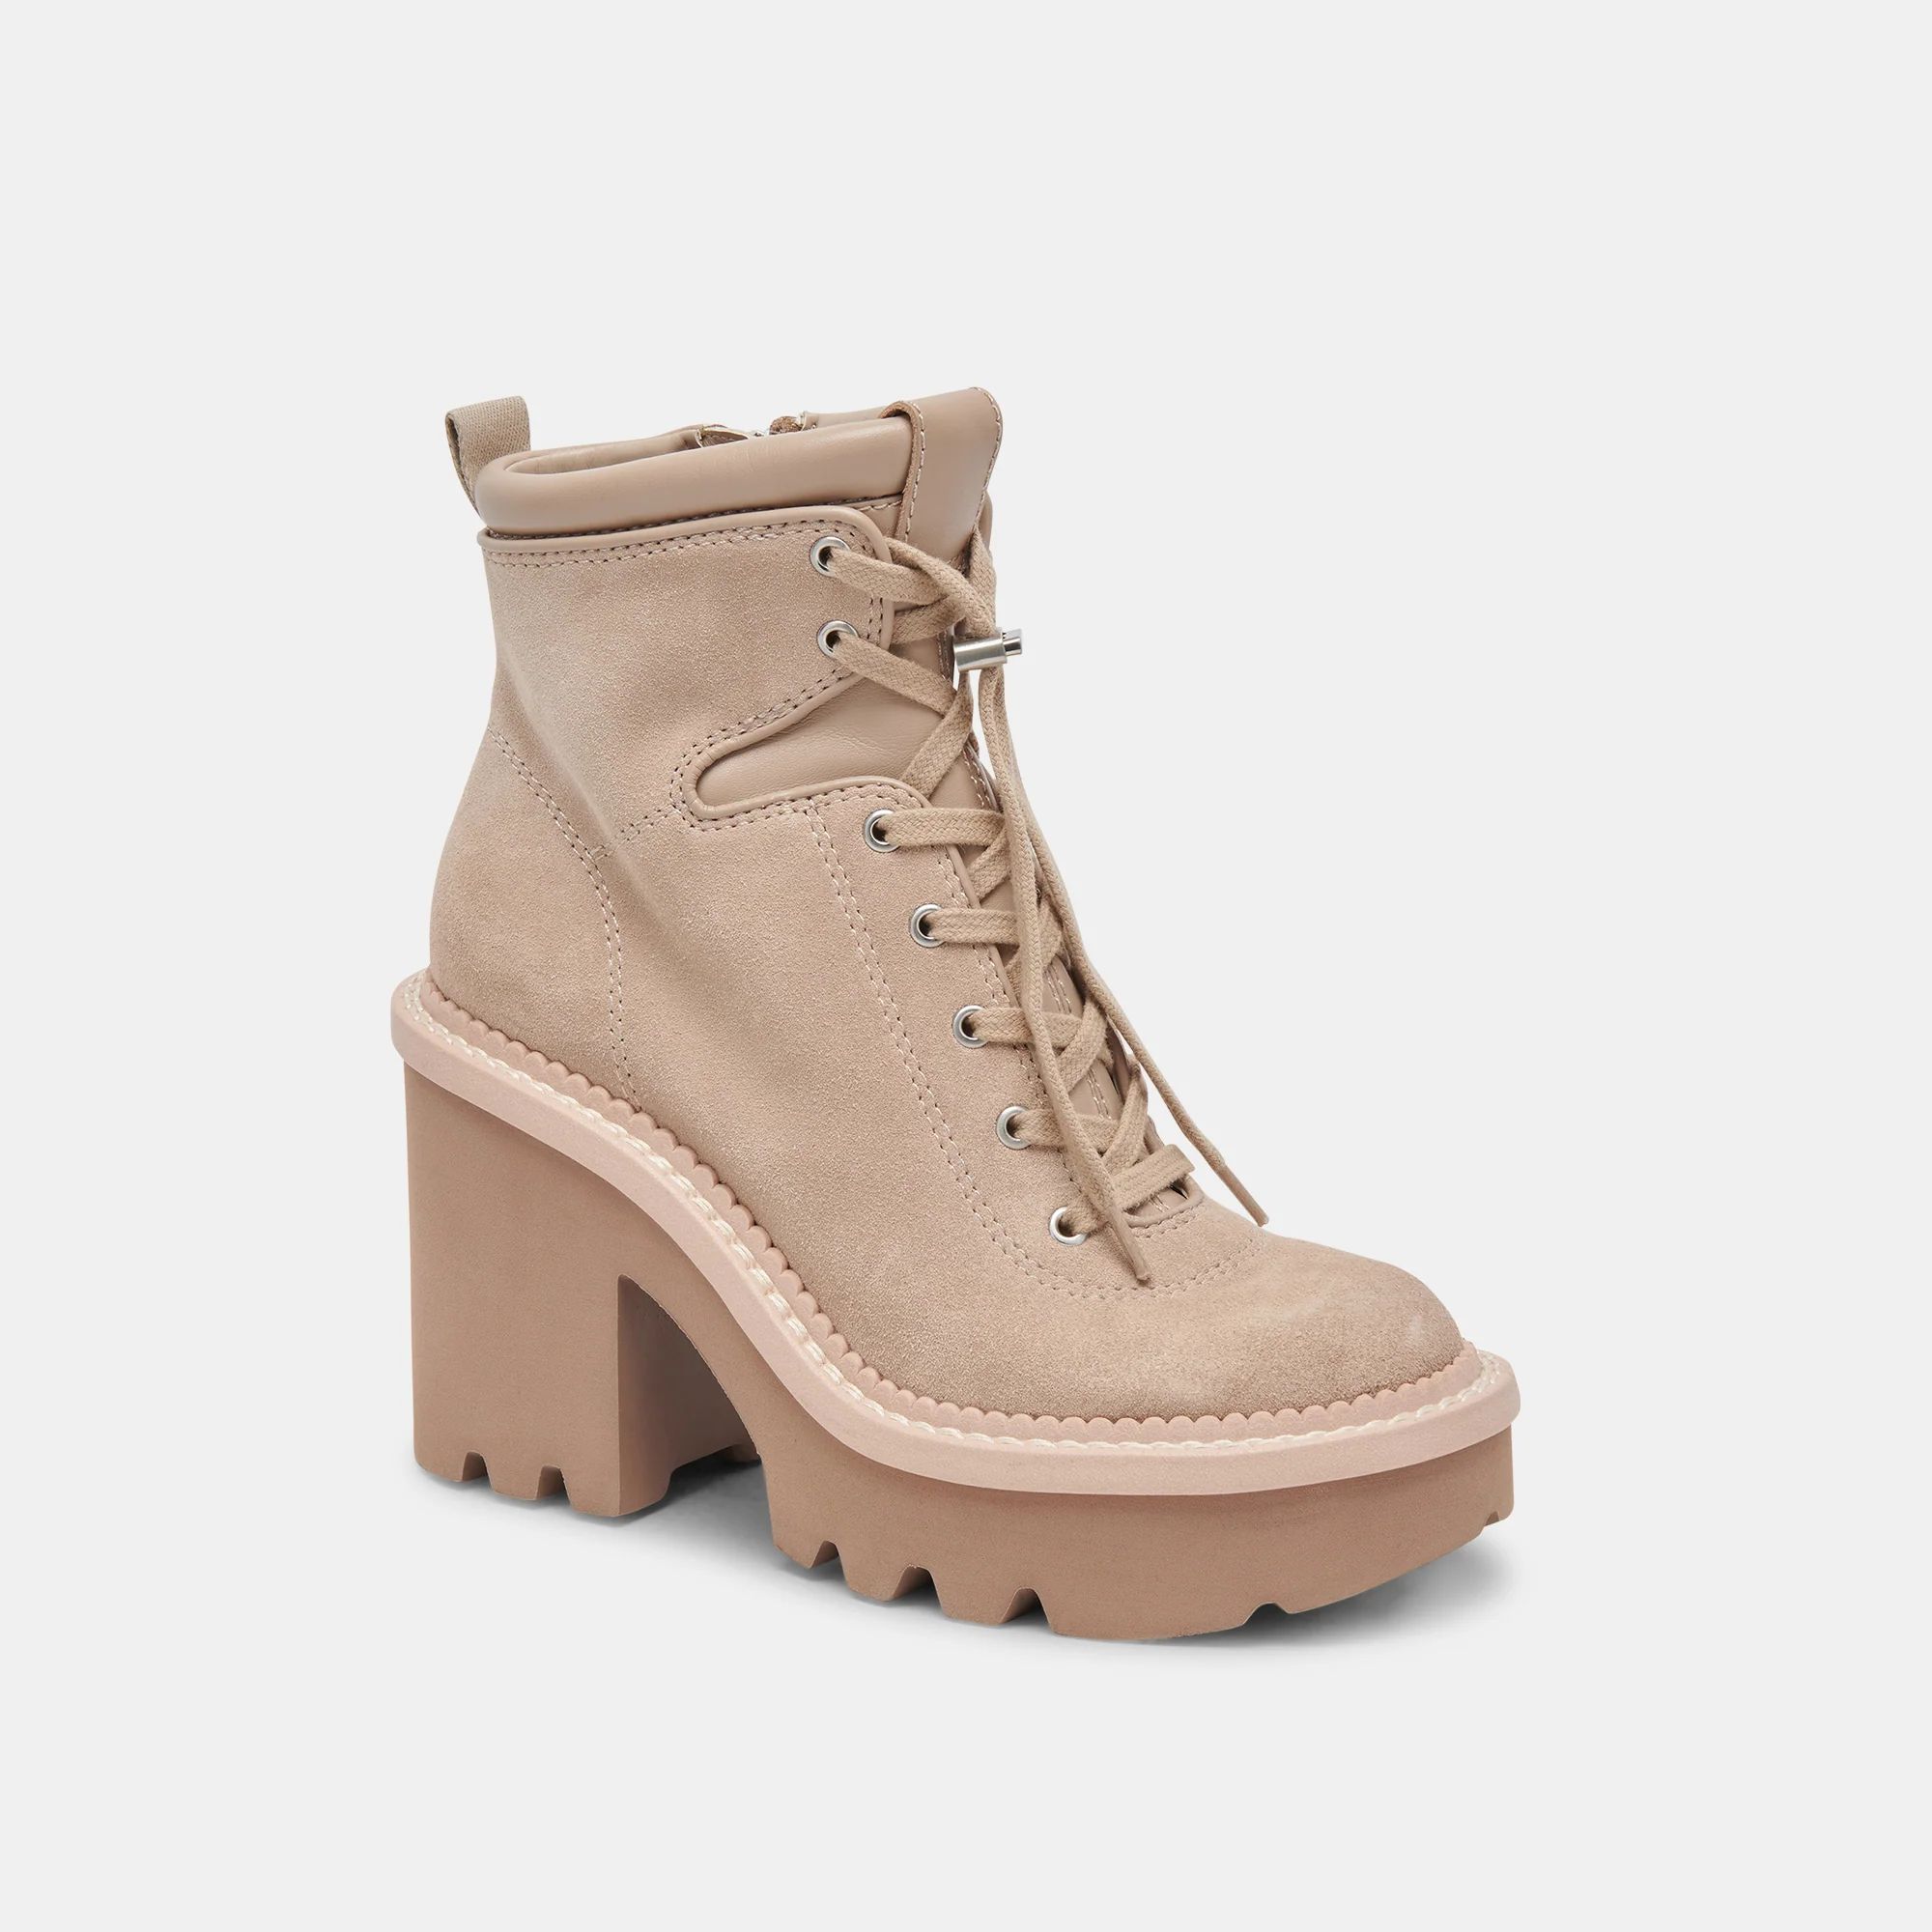 DOMMIE BOOTS TAUPE SUEDE | DolceVita.com